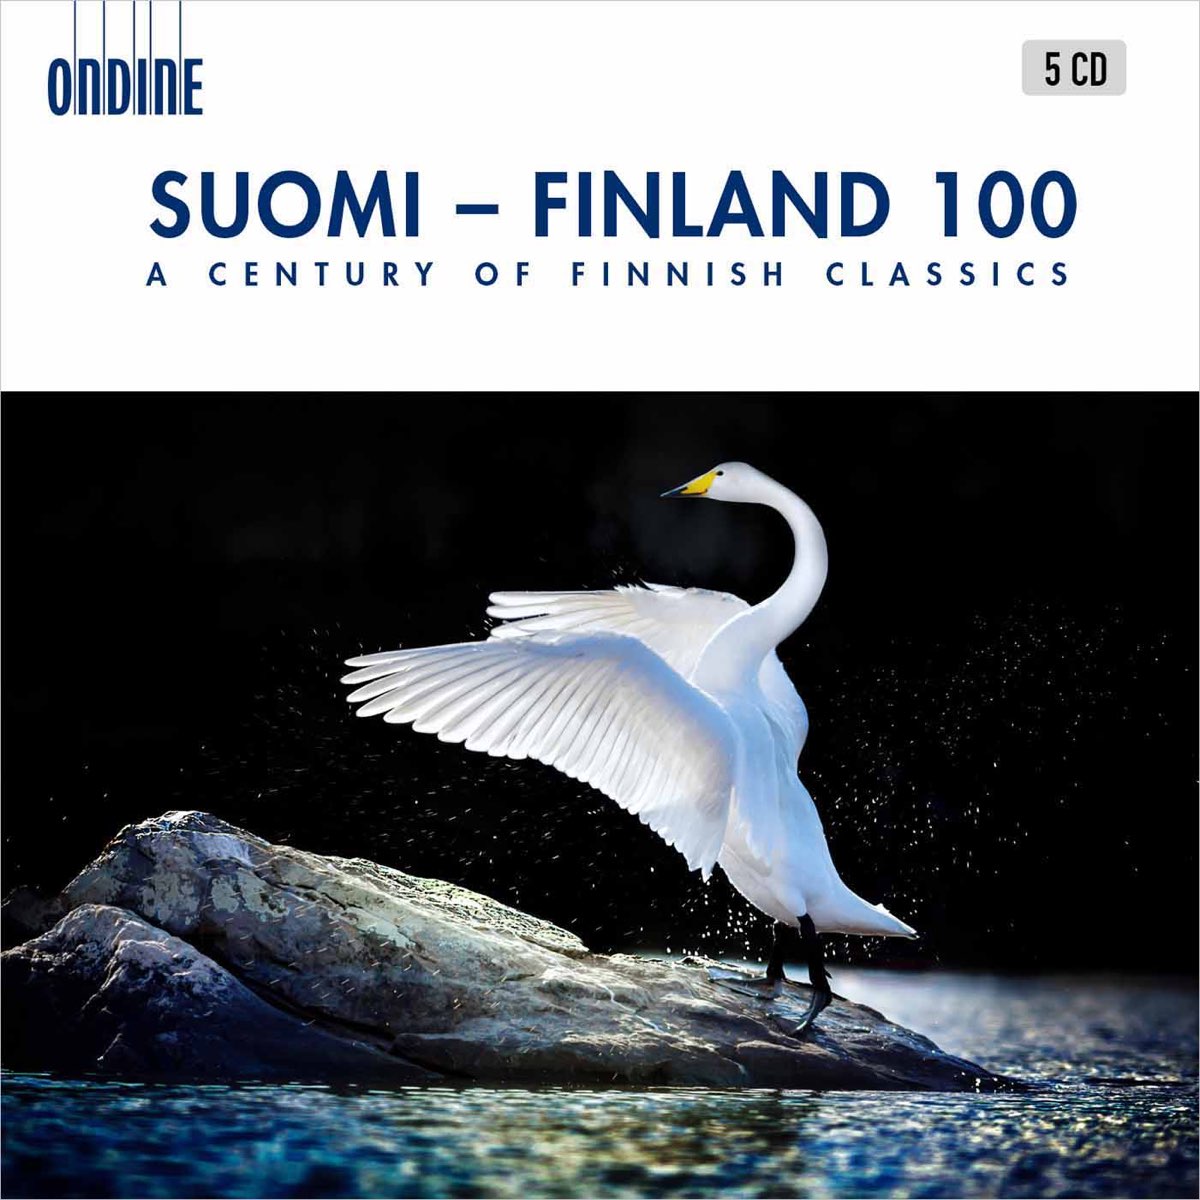 Finland 100: A Century of Finnish Classics by Various Artists on Apple Music